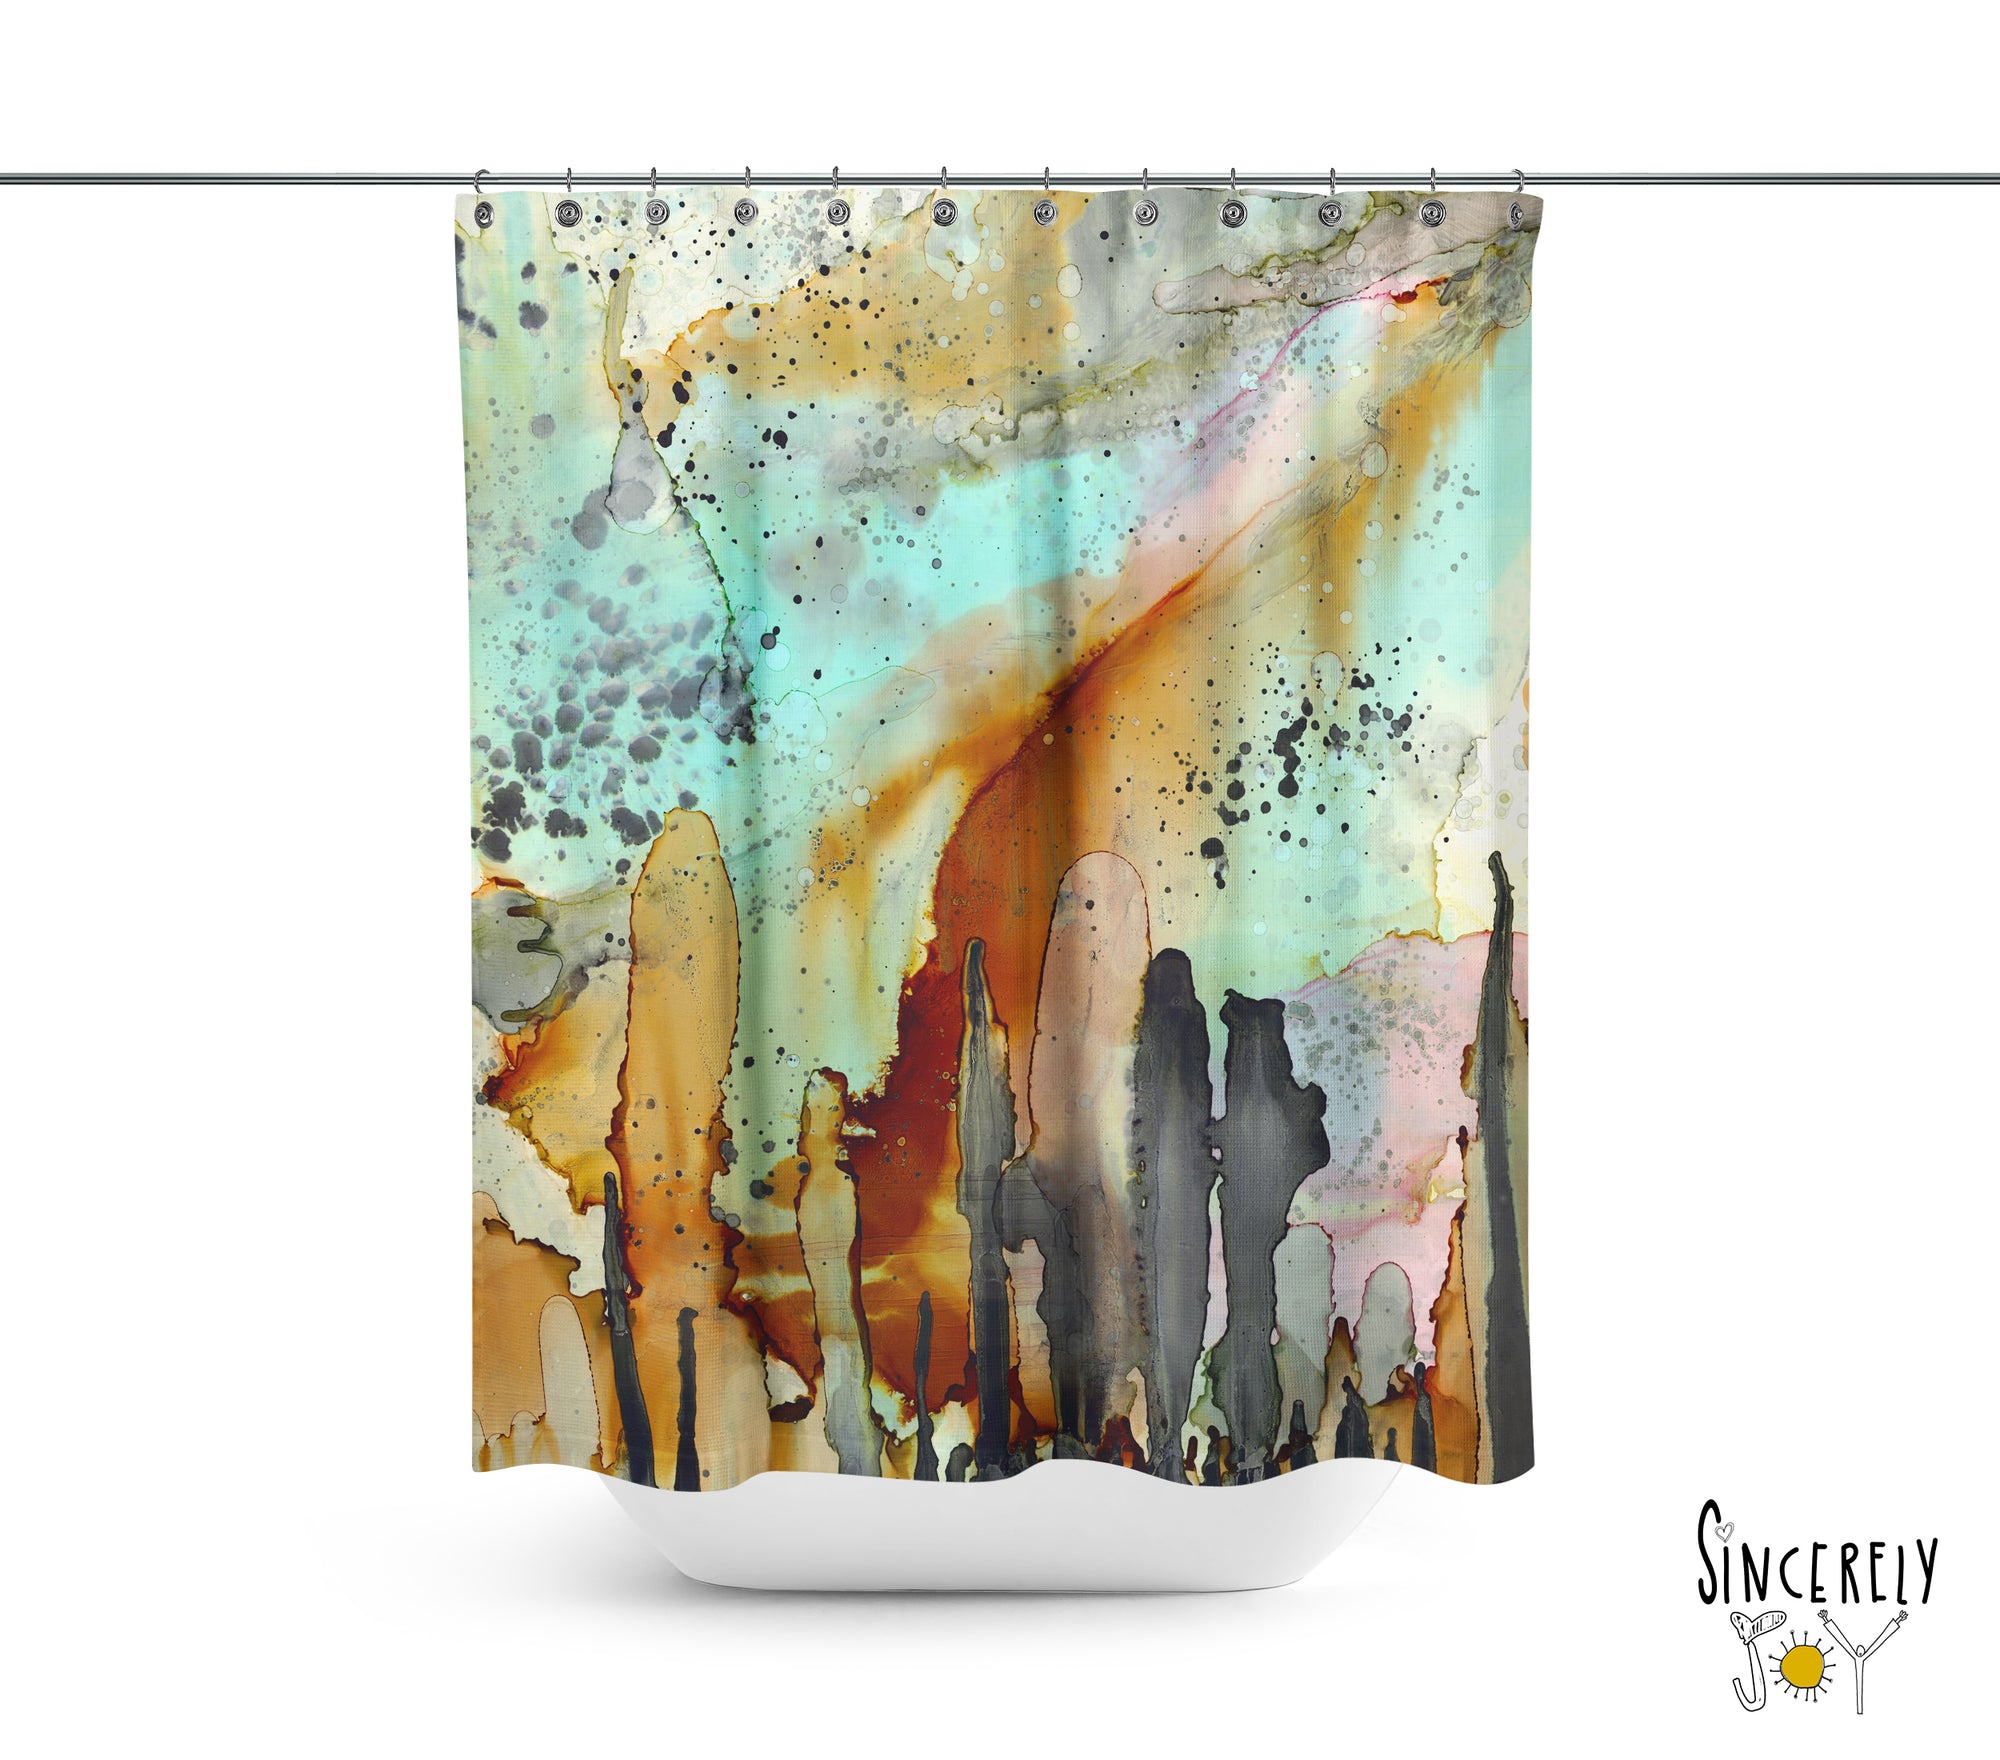 Abstract Mixed Media Shower Curtain 'From the Heavens'